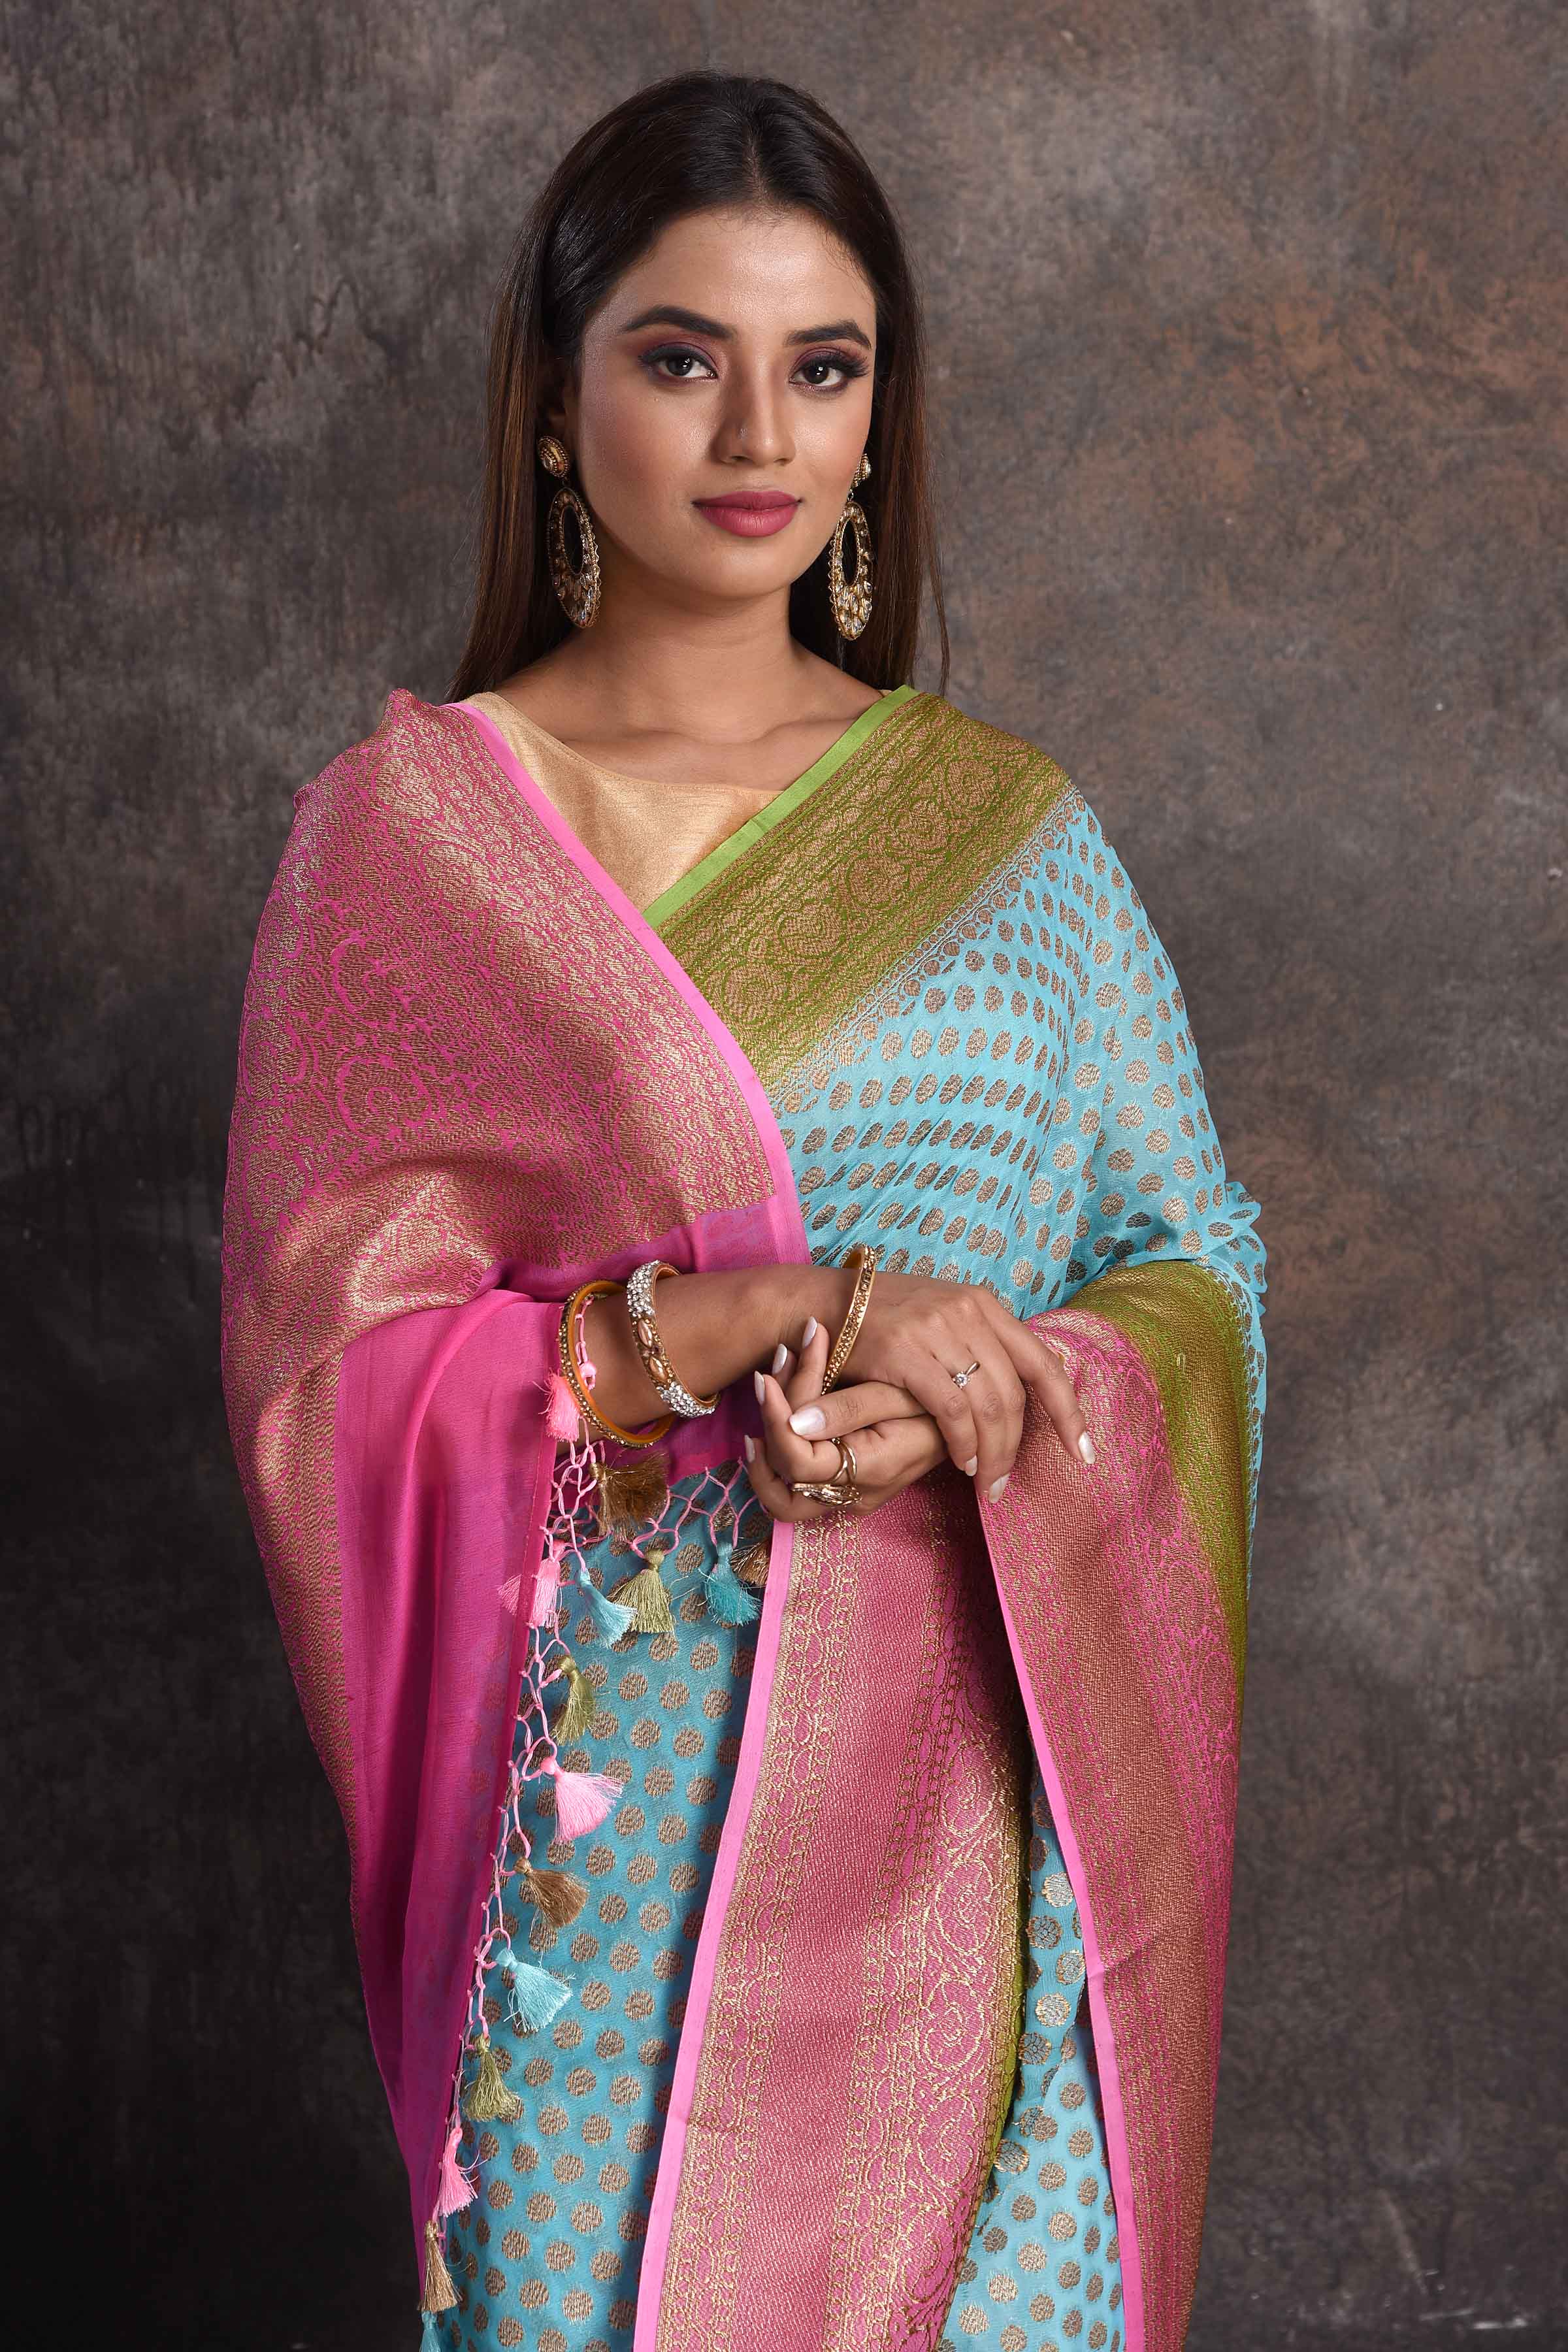 Buy beautiful sky blue georgette Banarasi saree online in USA with pink and green border, Be a vision of ethnic elegance on festive occasions in beautiful designer sarees, silk sarees, handloom sarees, Kanchipuram silk sarees, embroidered sarees from Pure Elegance Indian saree store in USA. -closeup